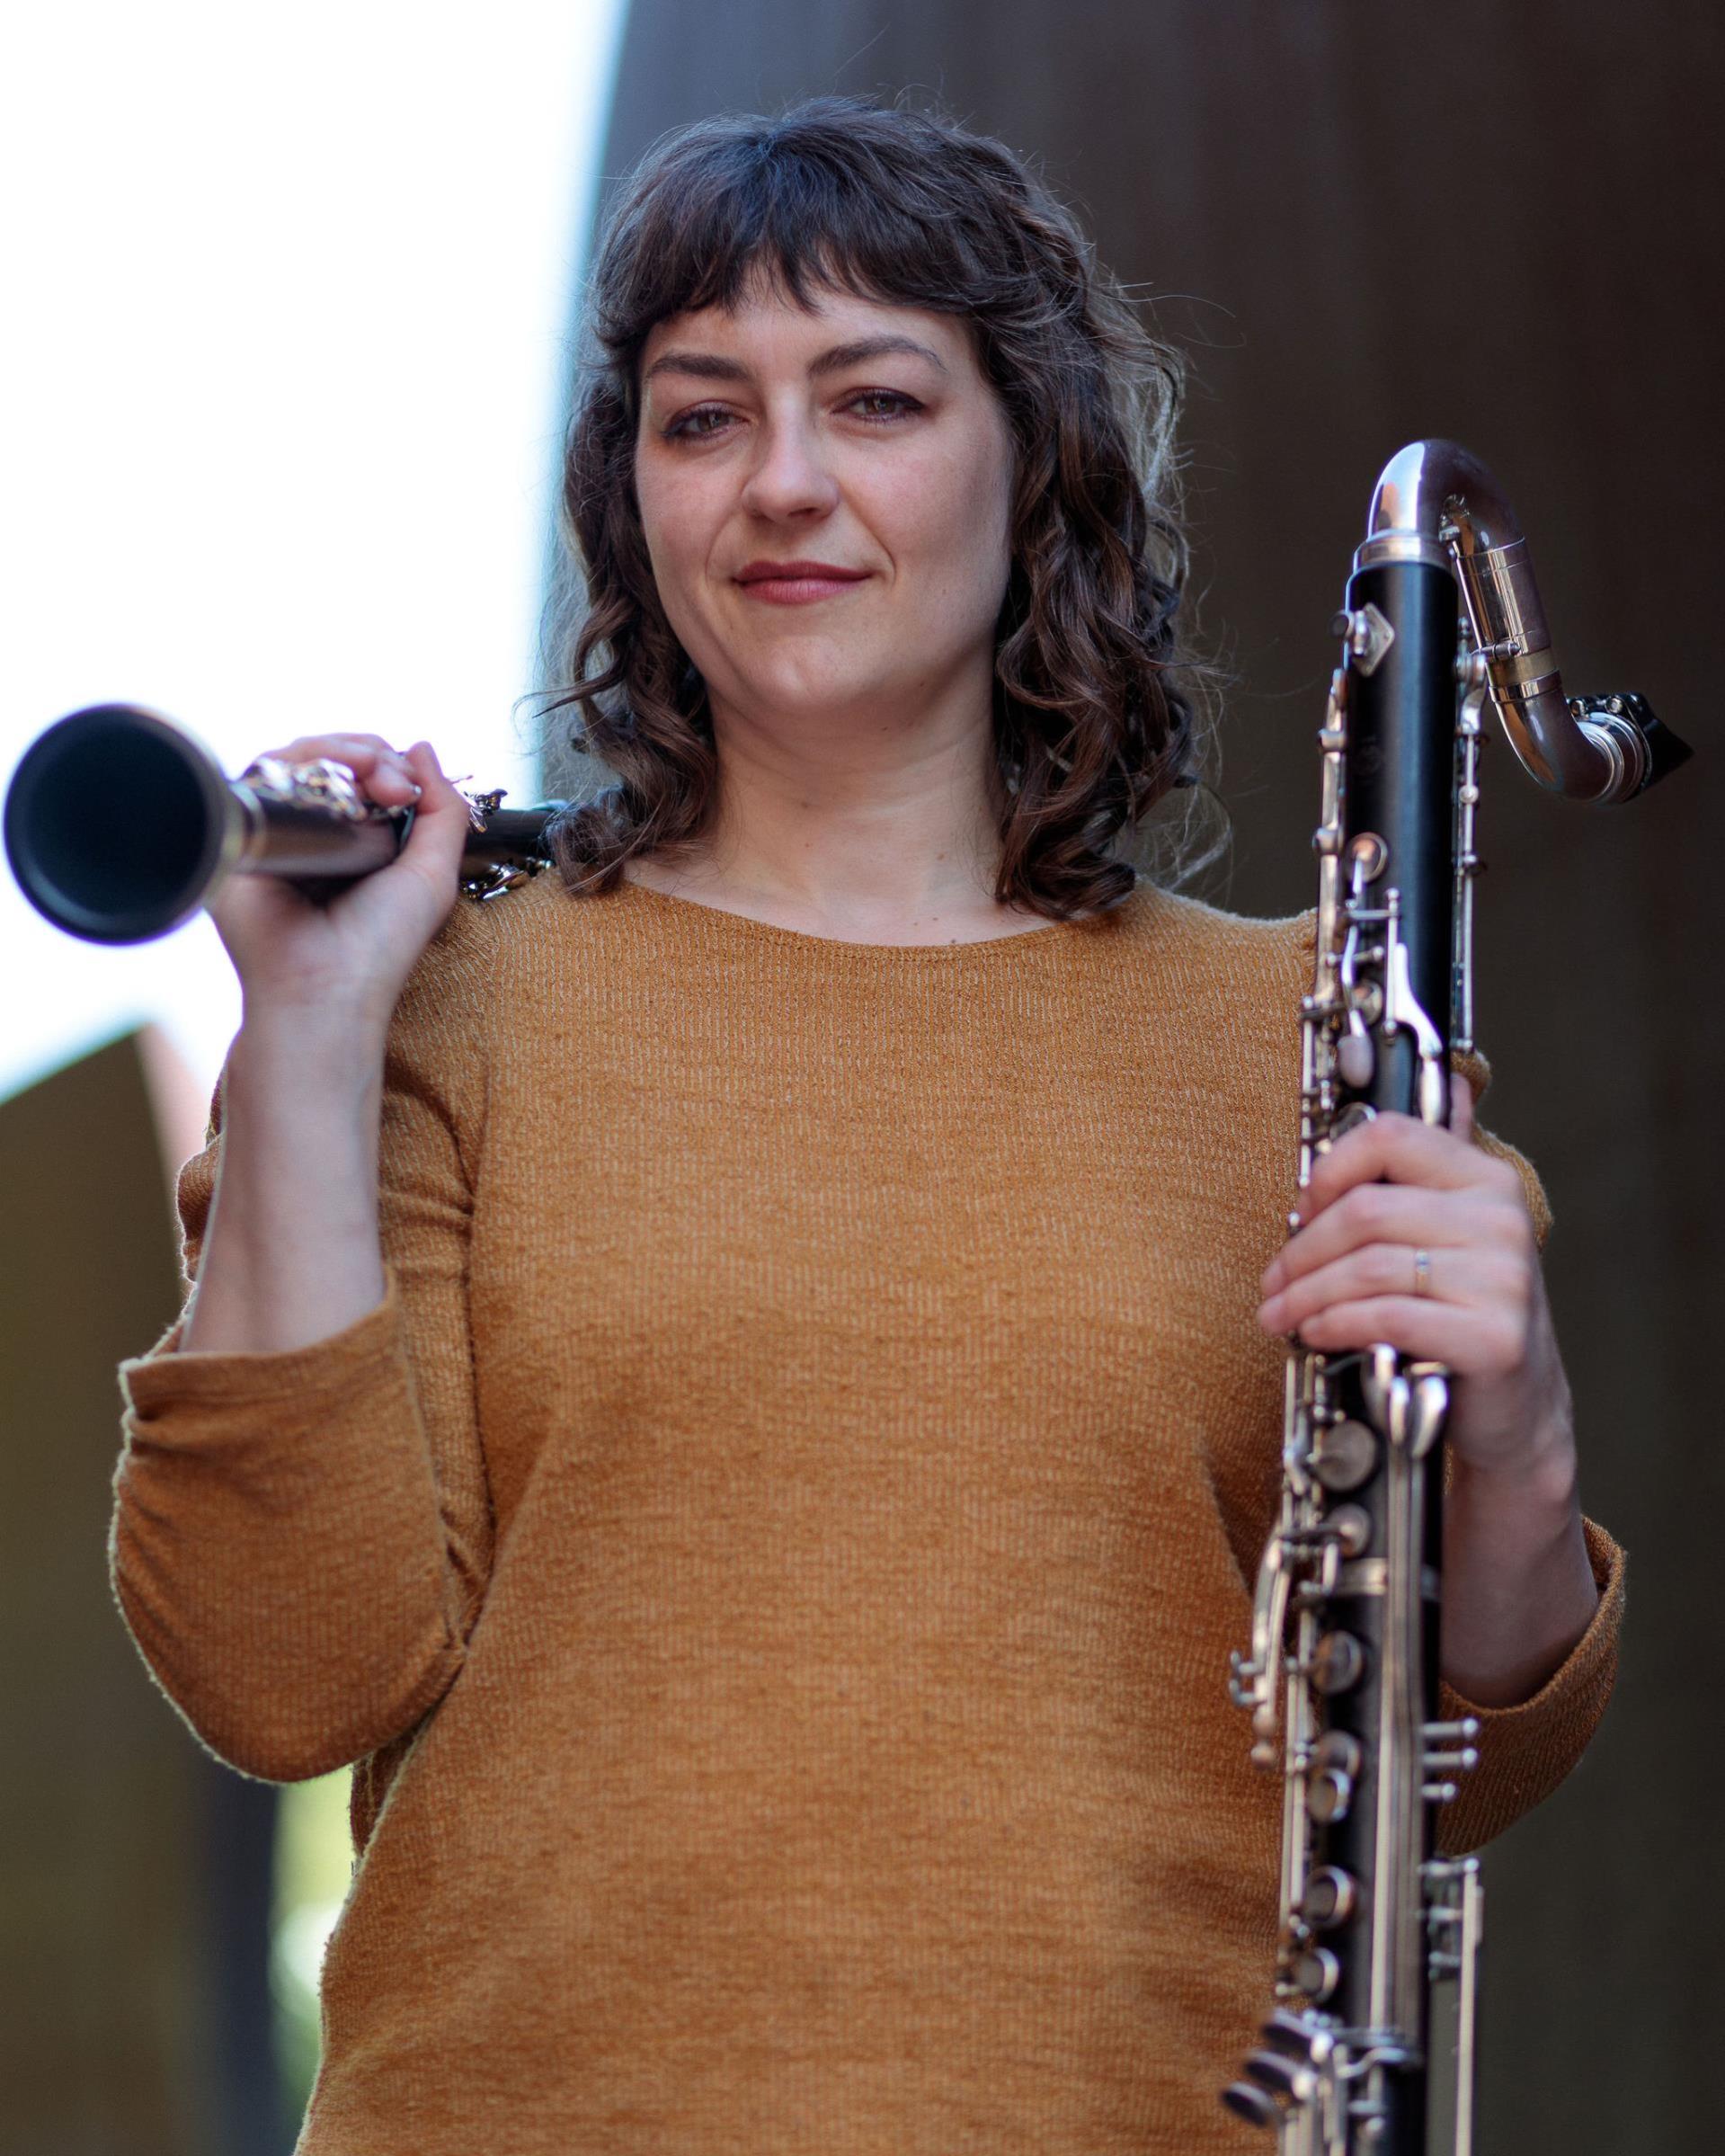 Faculty member Rachel Yoder outdoors holding two clarinets